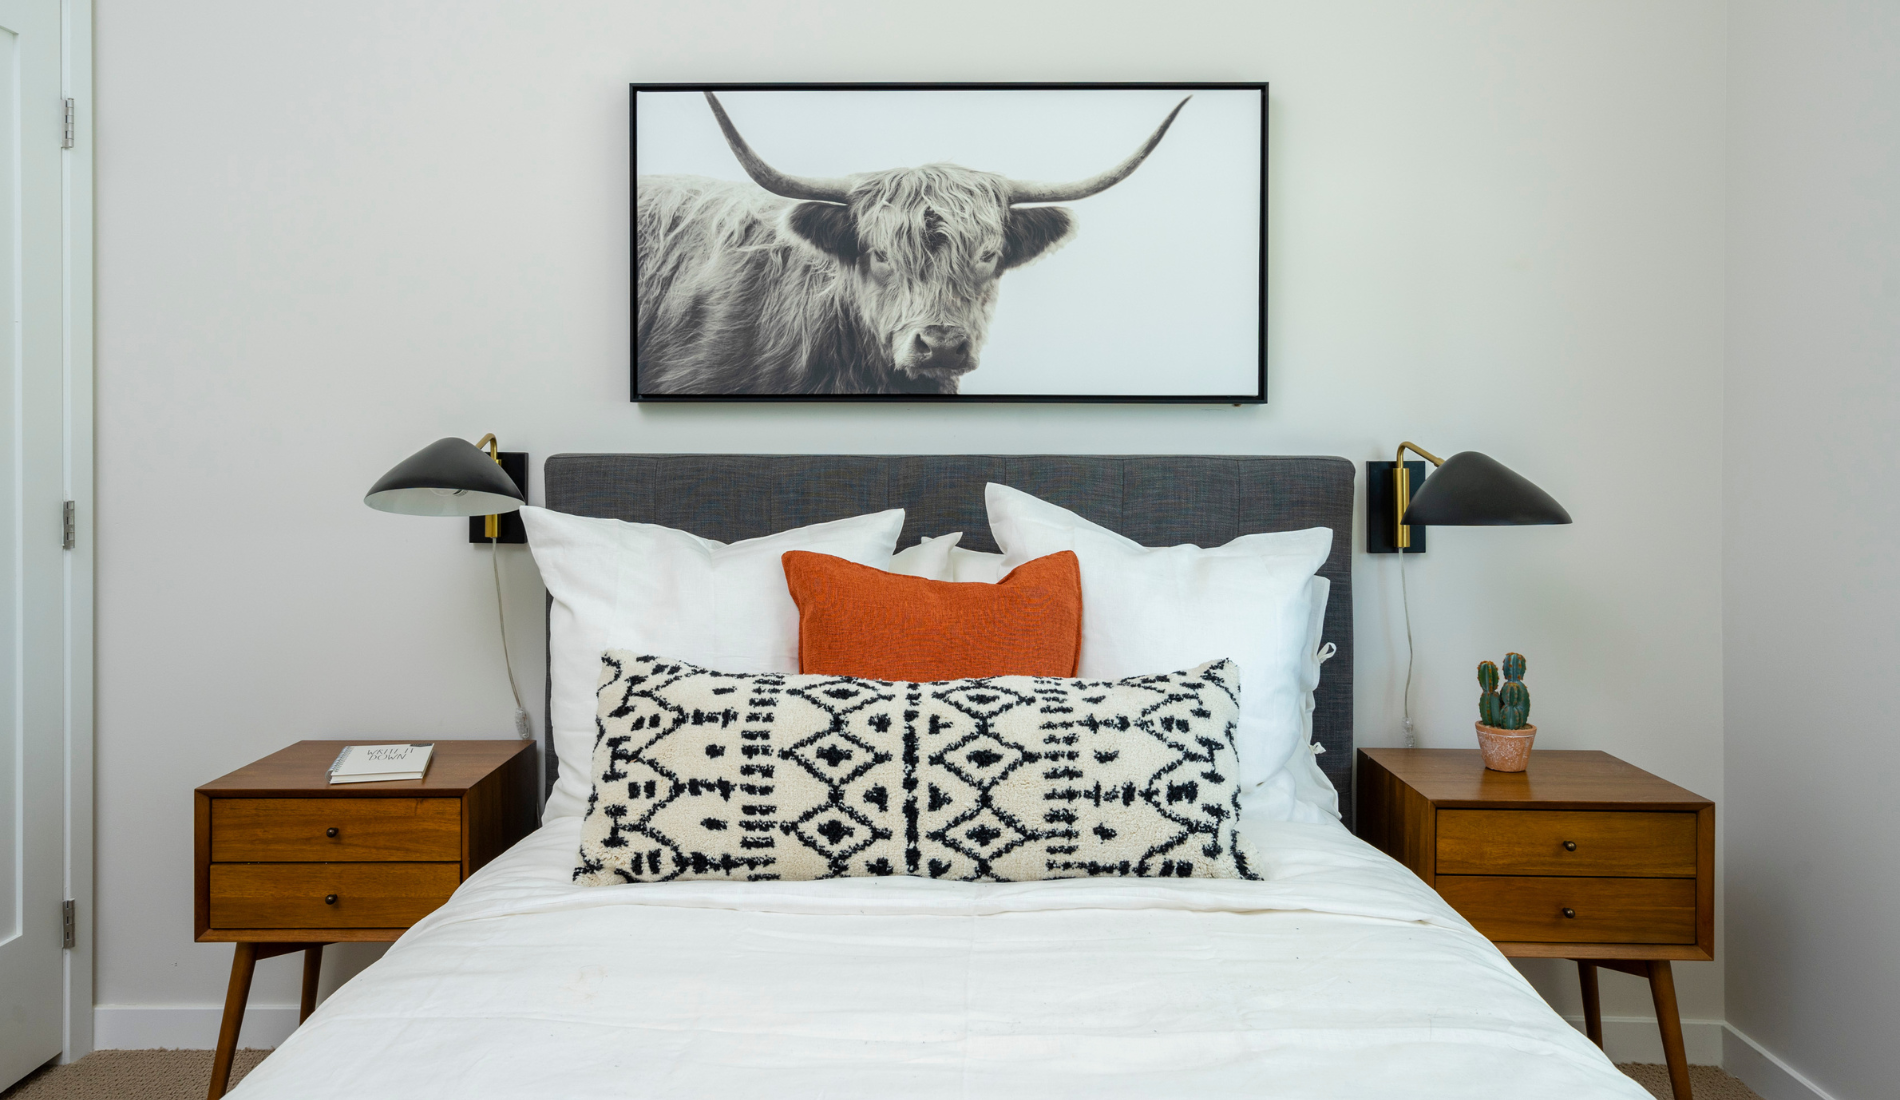 Palm Springs luxury modern resort interior design bedroom with pillows, photograph of bull on wall